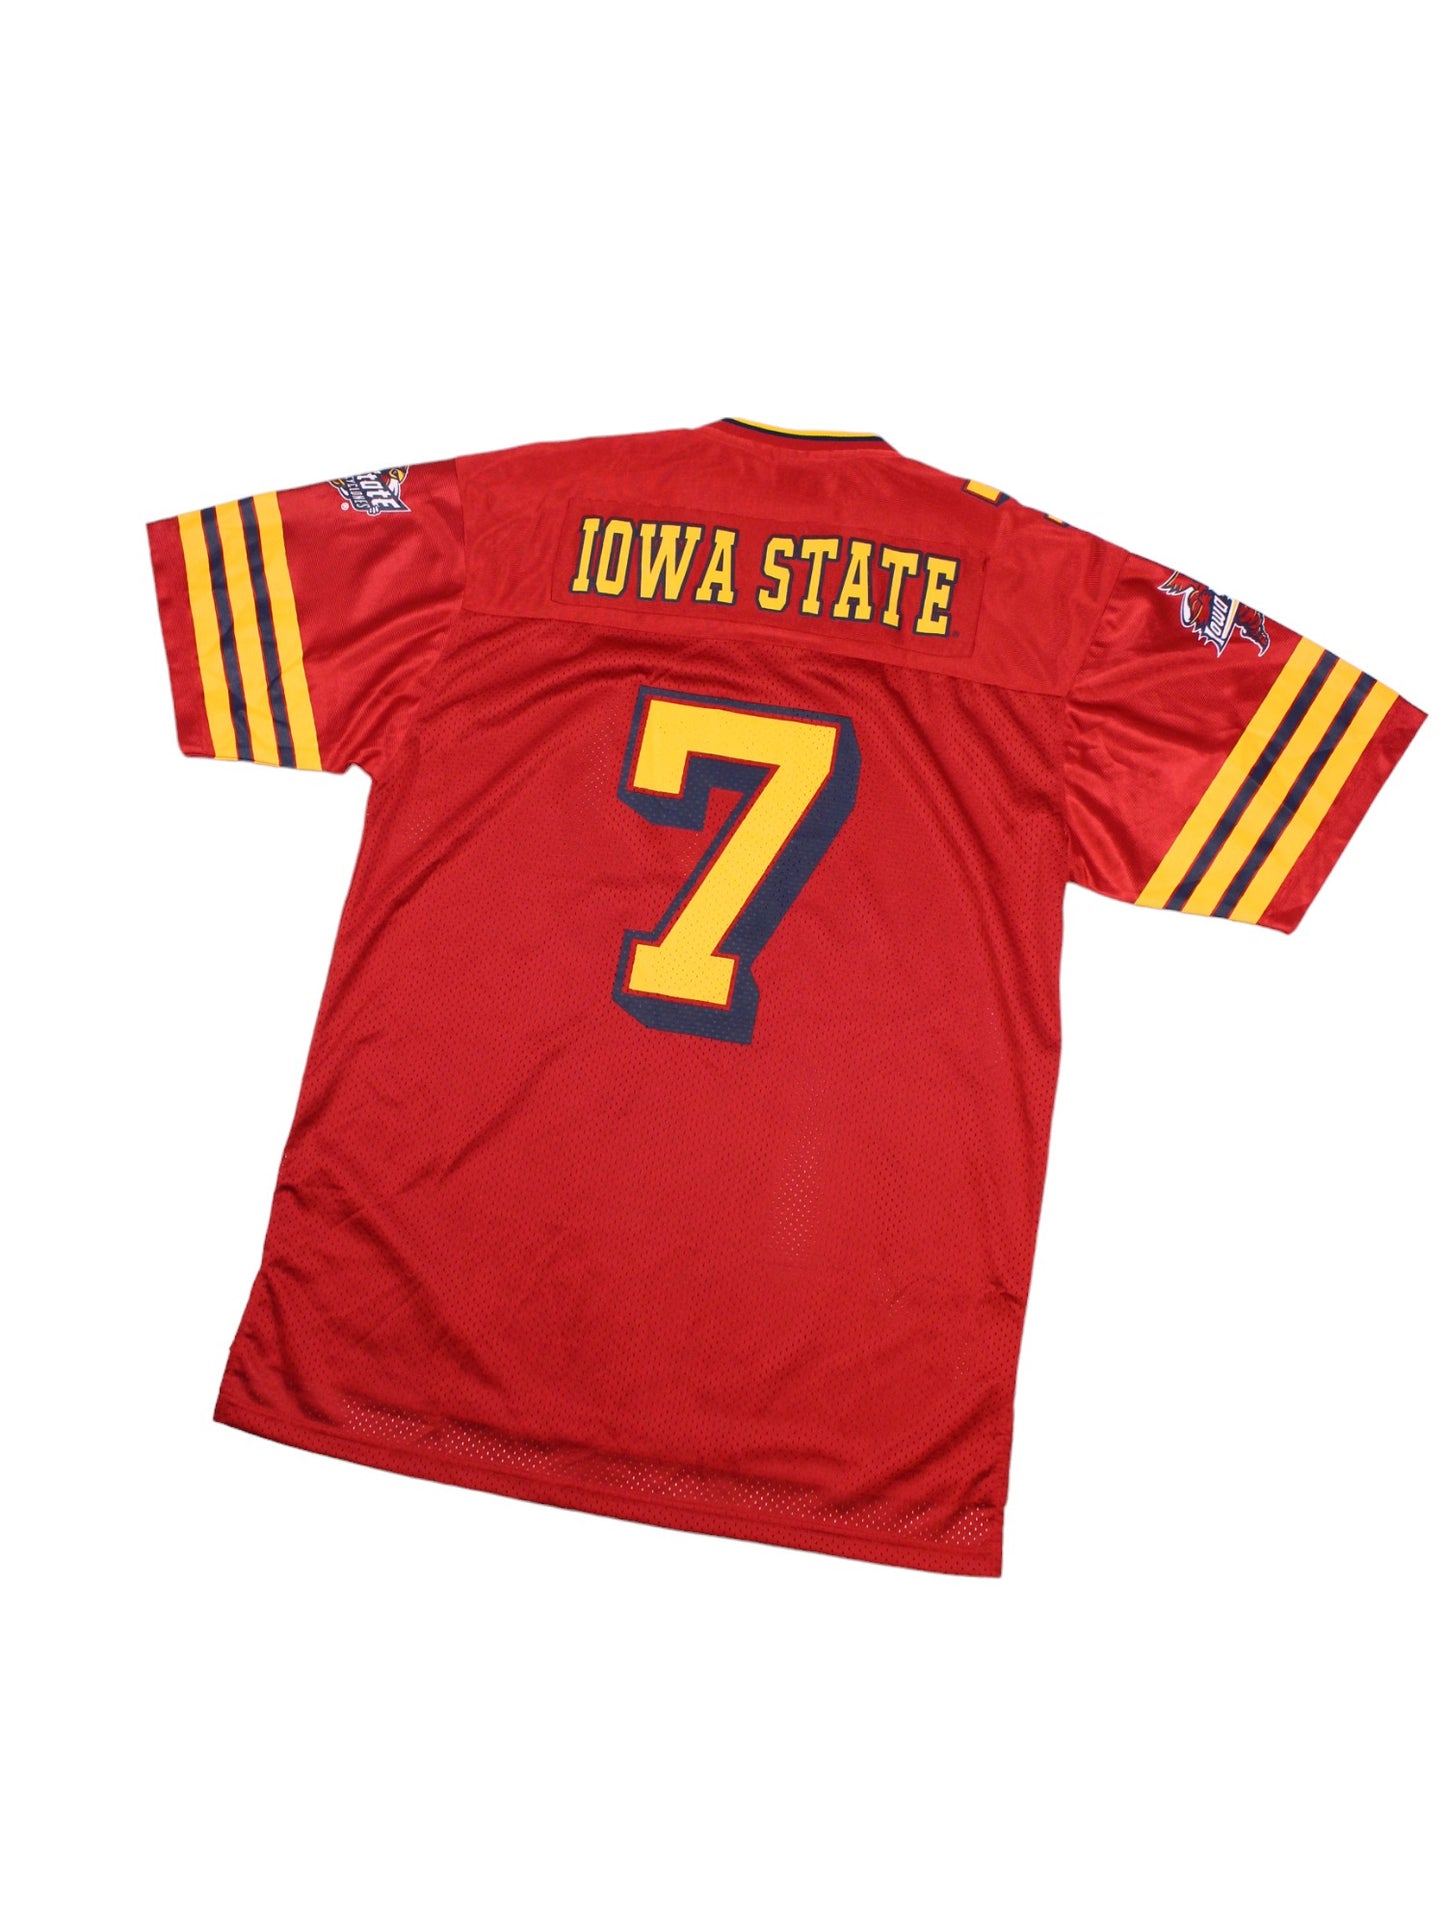 Iowa State Cyclones Red Jersey #7 L